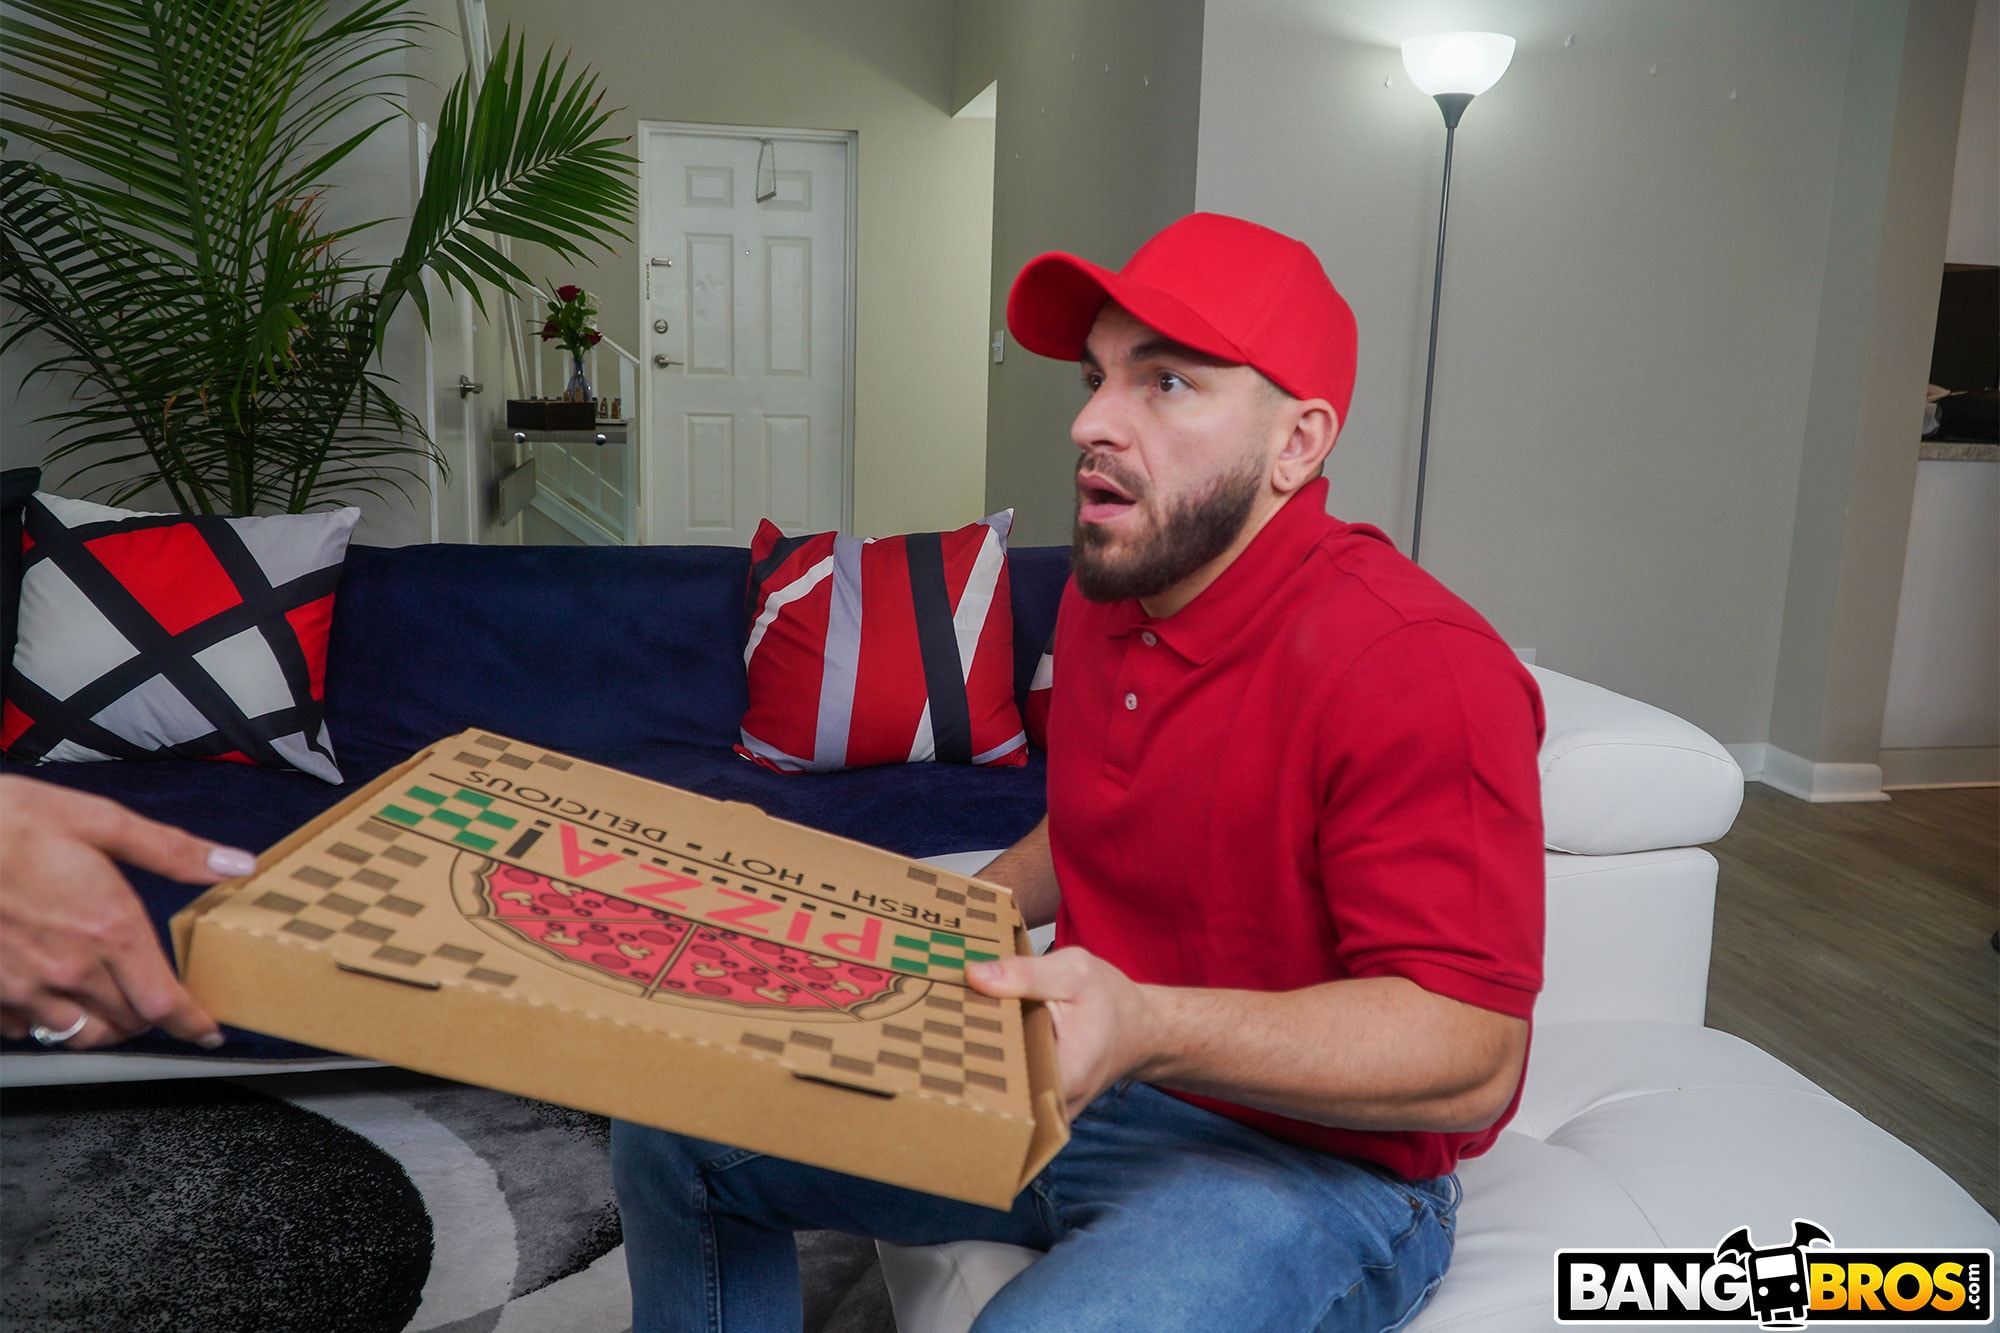 Bangbros 'Pizza Guy Caught in 4K' starring Macy Meadows (Photo 260)